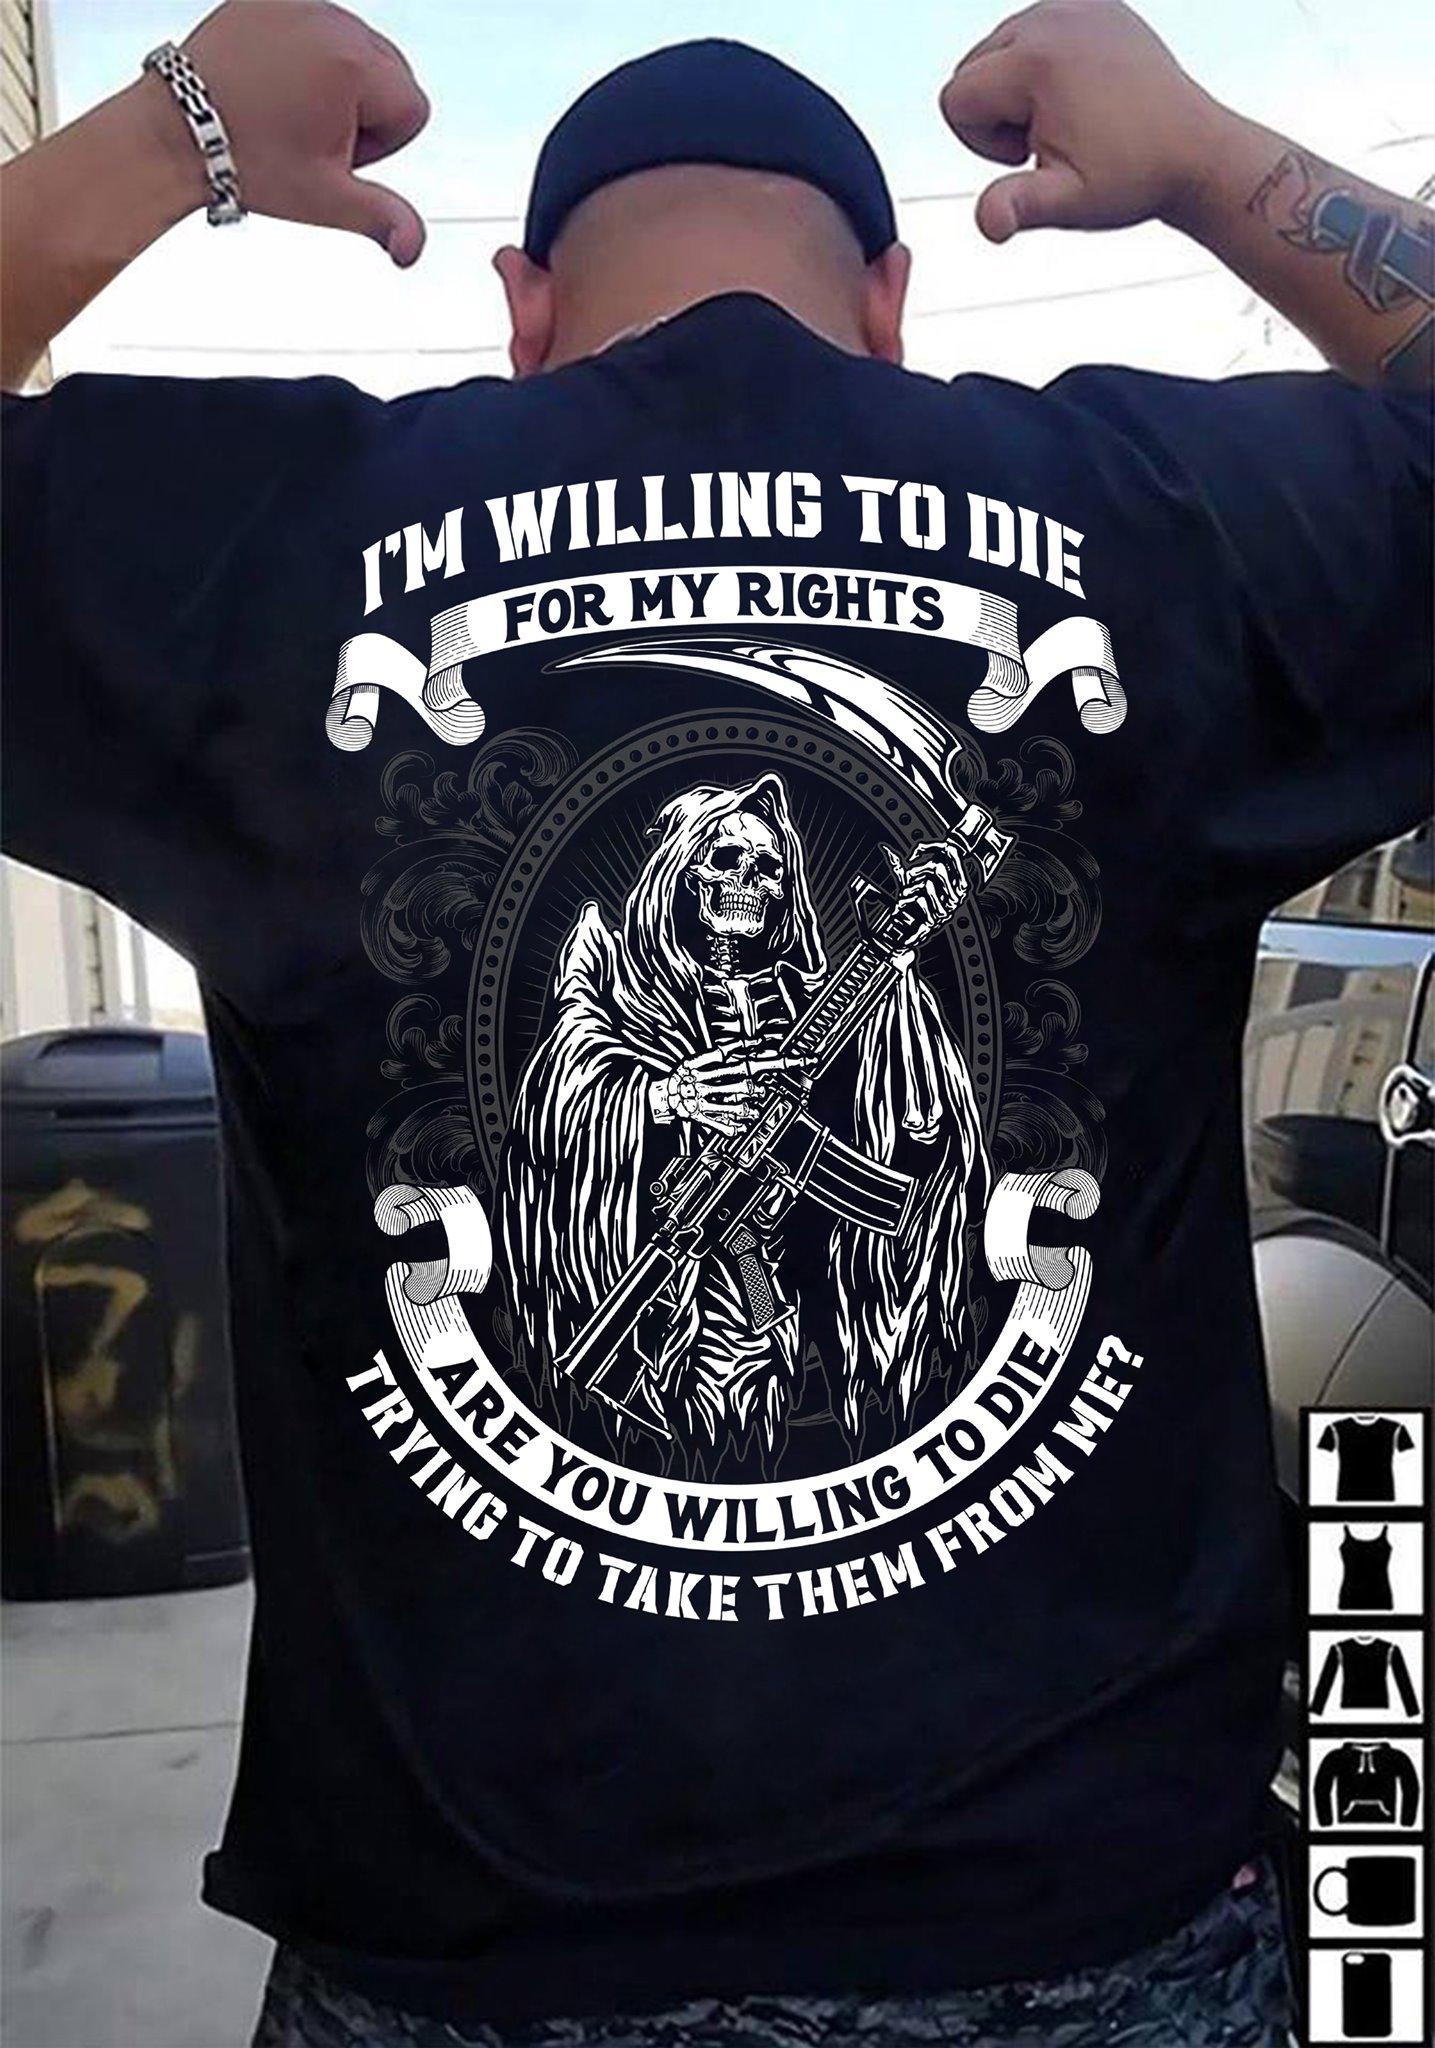 I'm willing to die for my rights are you willing to die trying to take them from me - Black evil